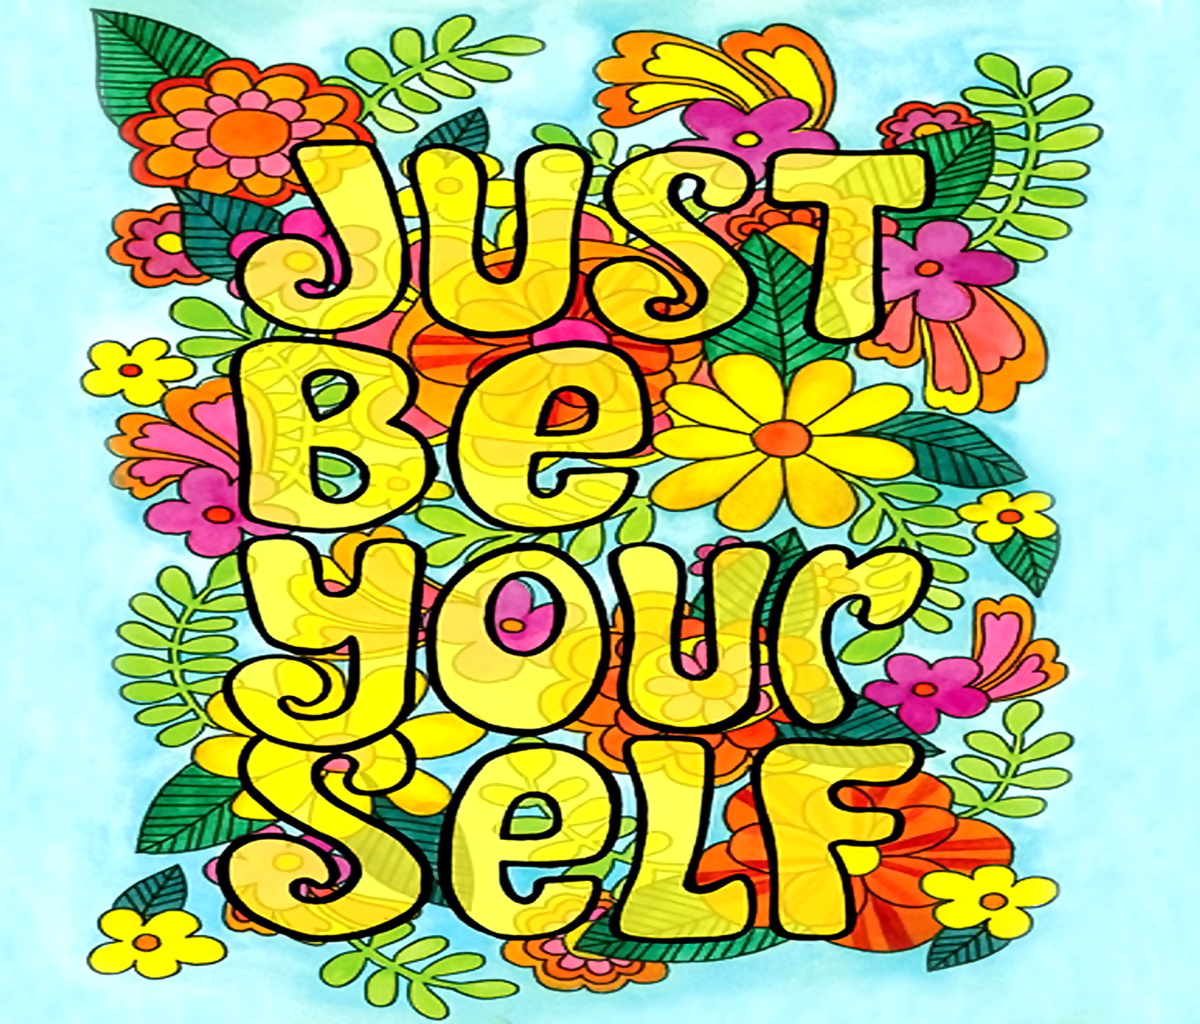 Just Be Yourself wallpaper 1200x1024